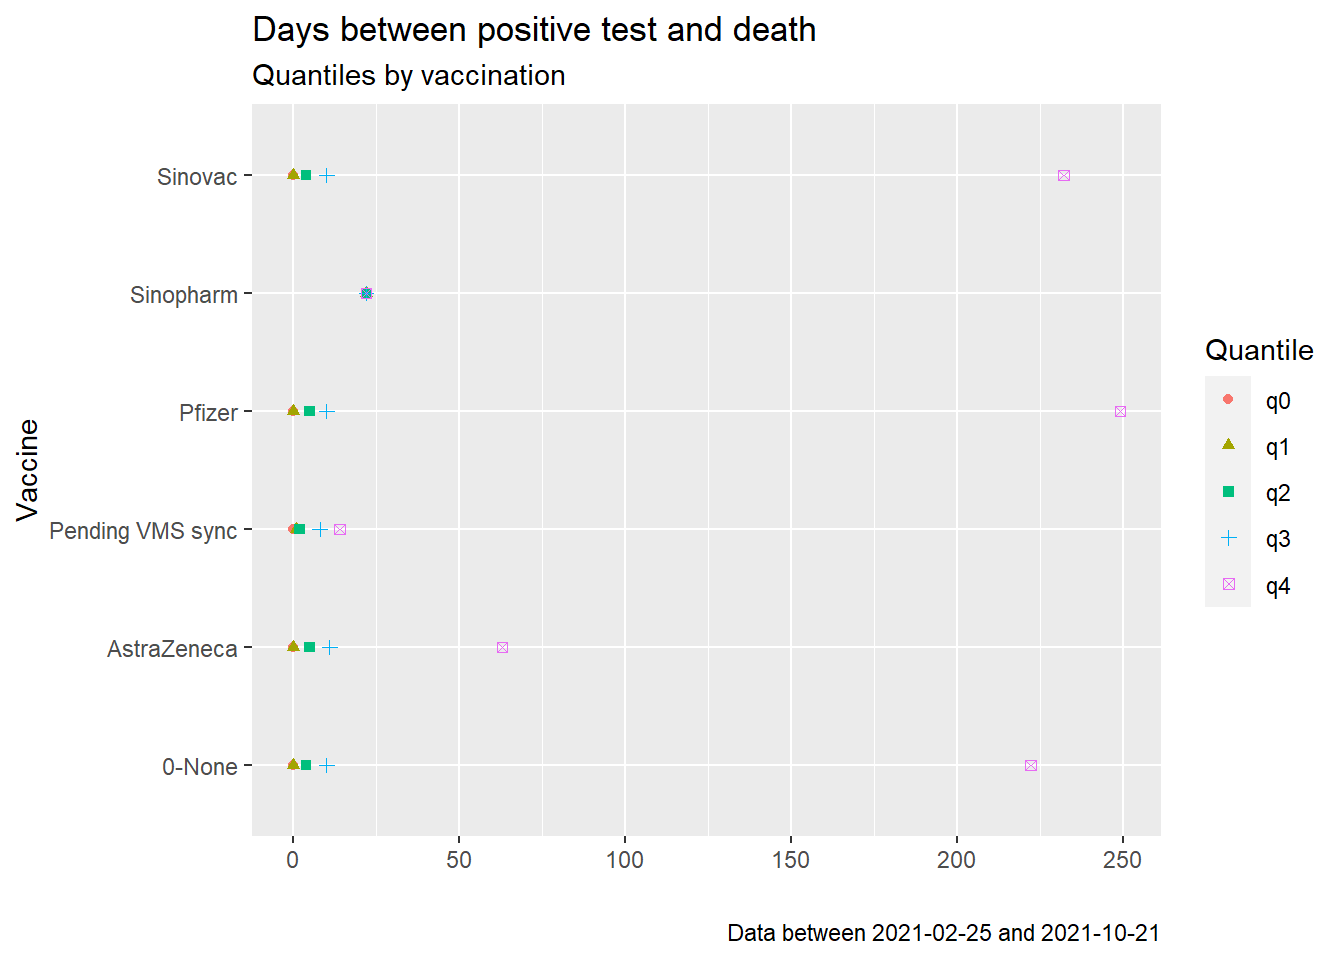 Quantiles of days between positive test and death